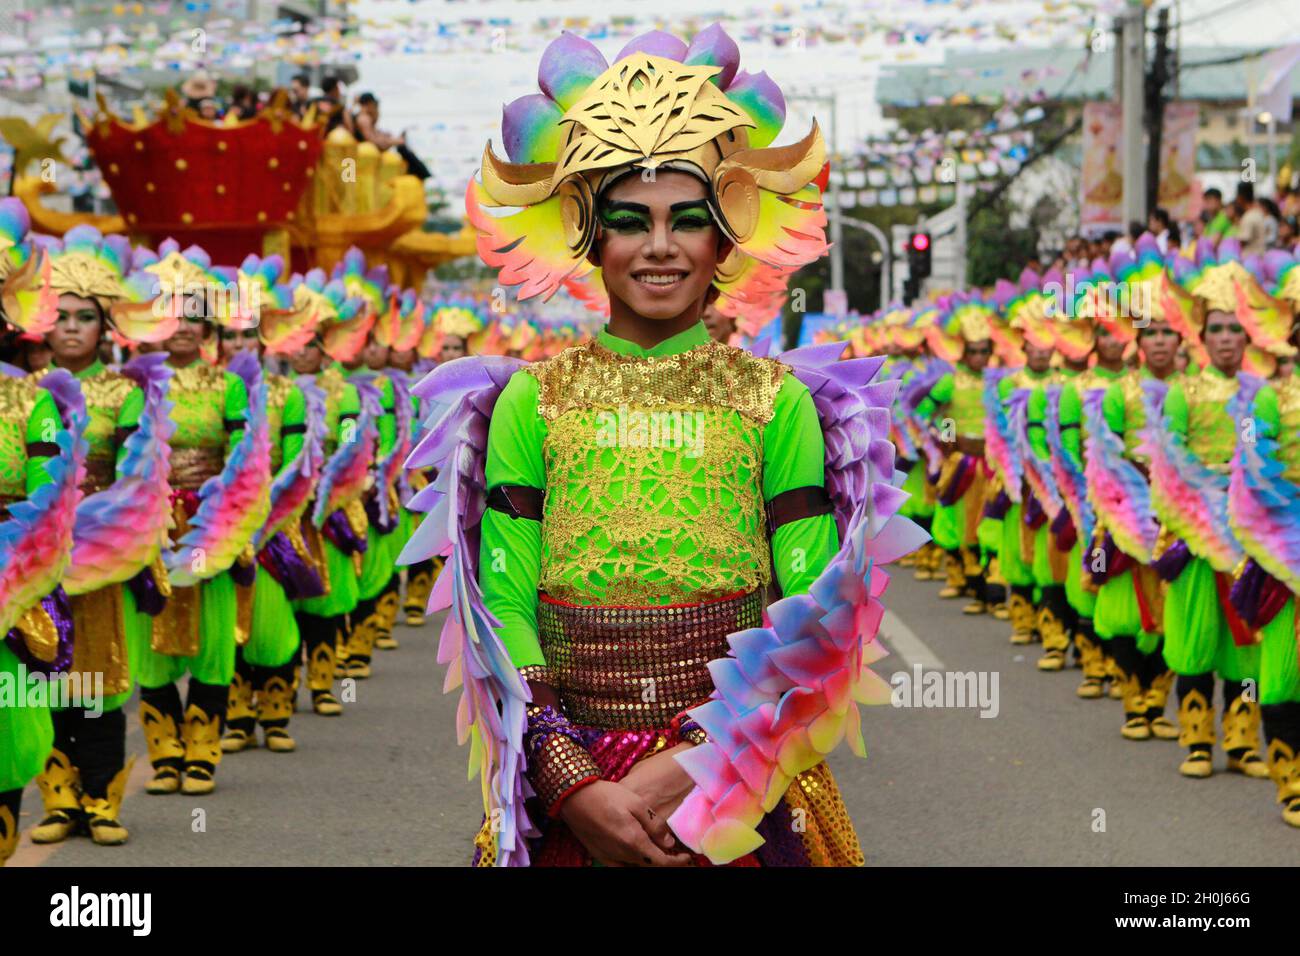 People wearing colorful costumes during the Sinulog Festival in Cebu Province. Sinulog Festival is annually celebrated at the same time as Ati-Atihan, both festivals are in honor of the infant Jesus. Philippines. Stock Photo